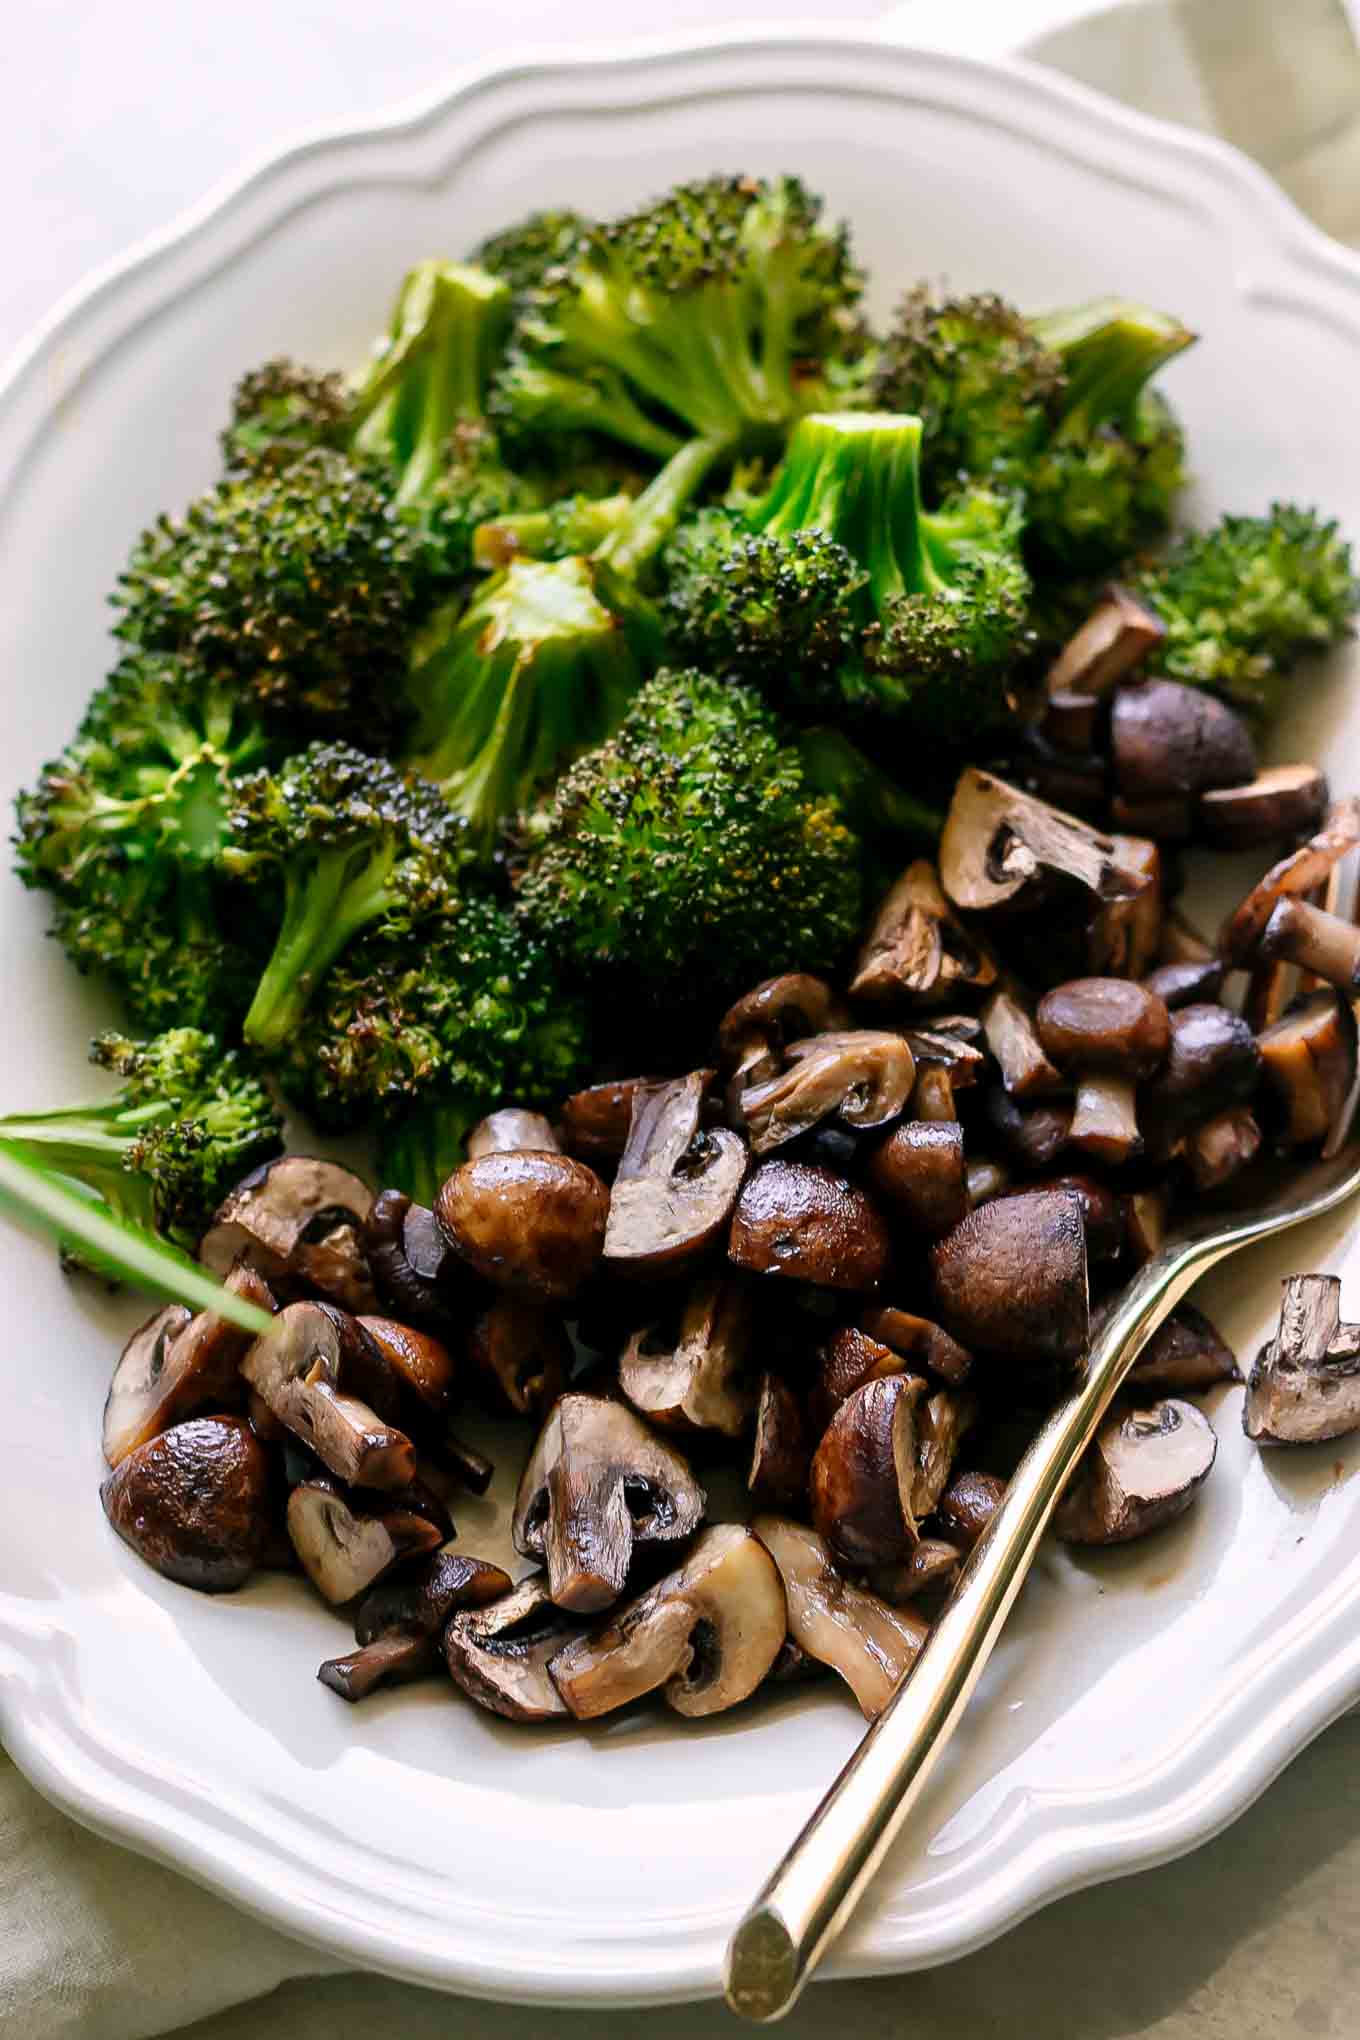 a close up photo of baked mushrooms and broccoli side dish